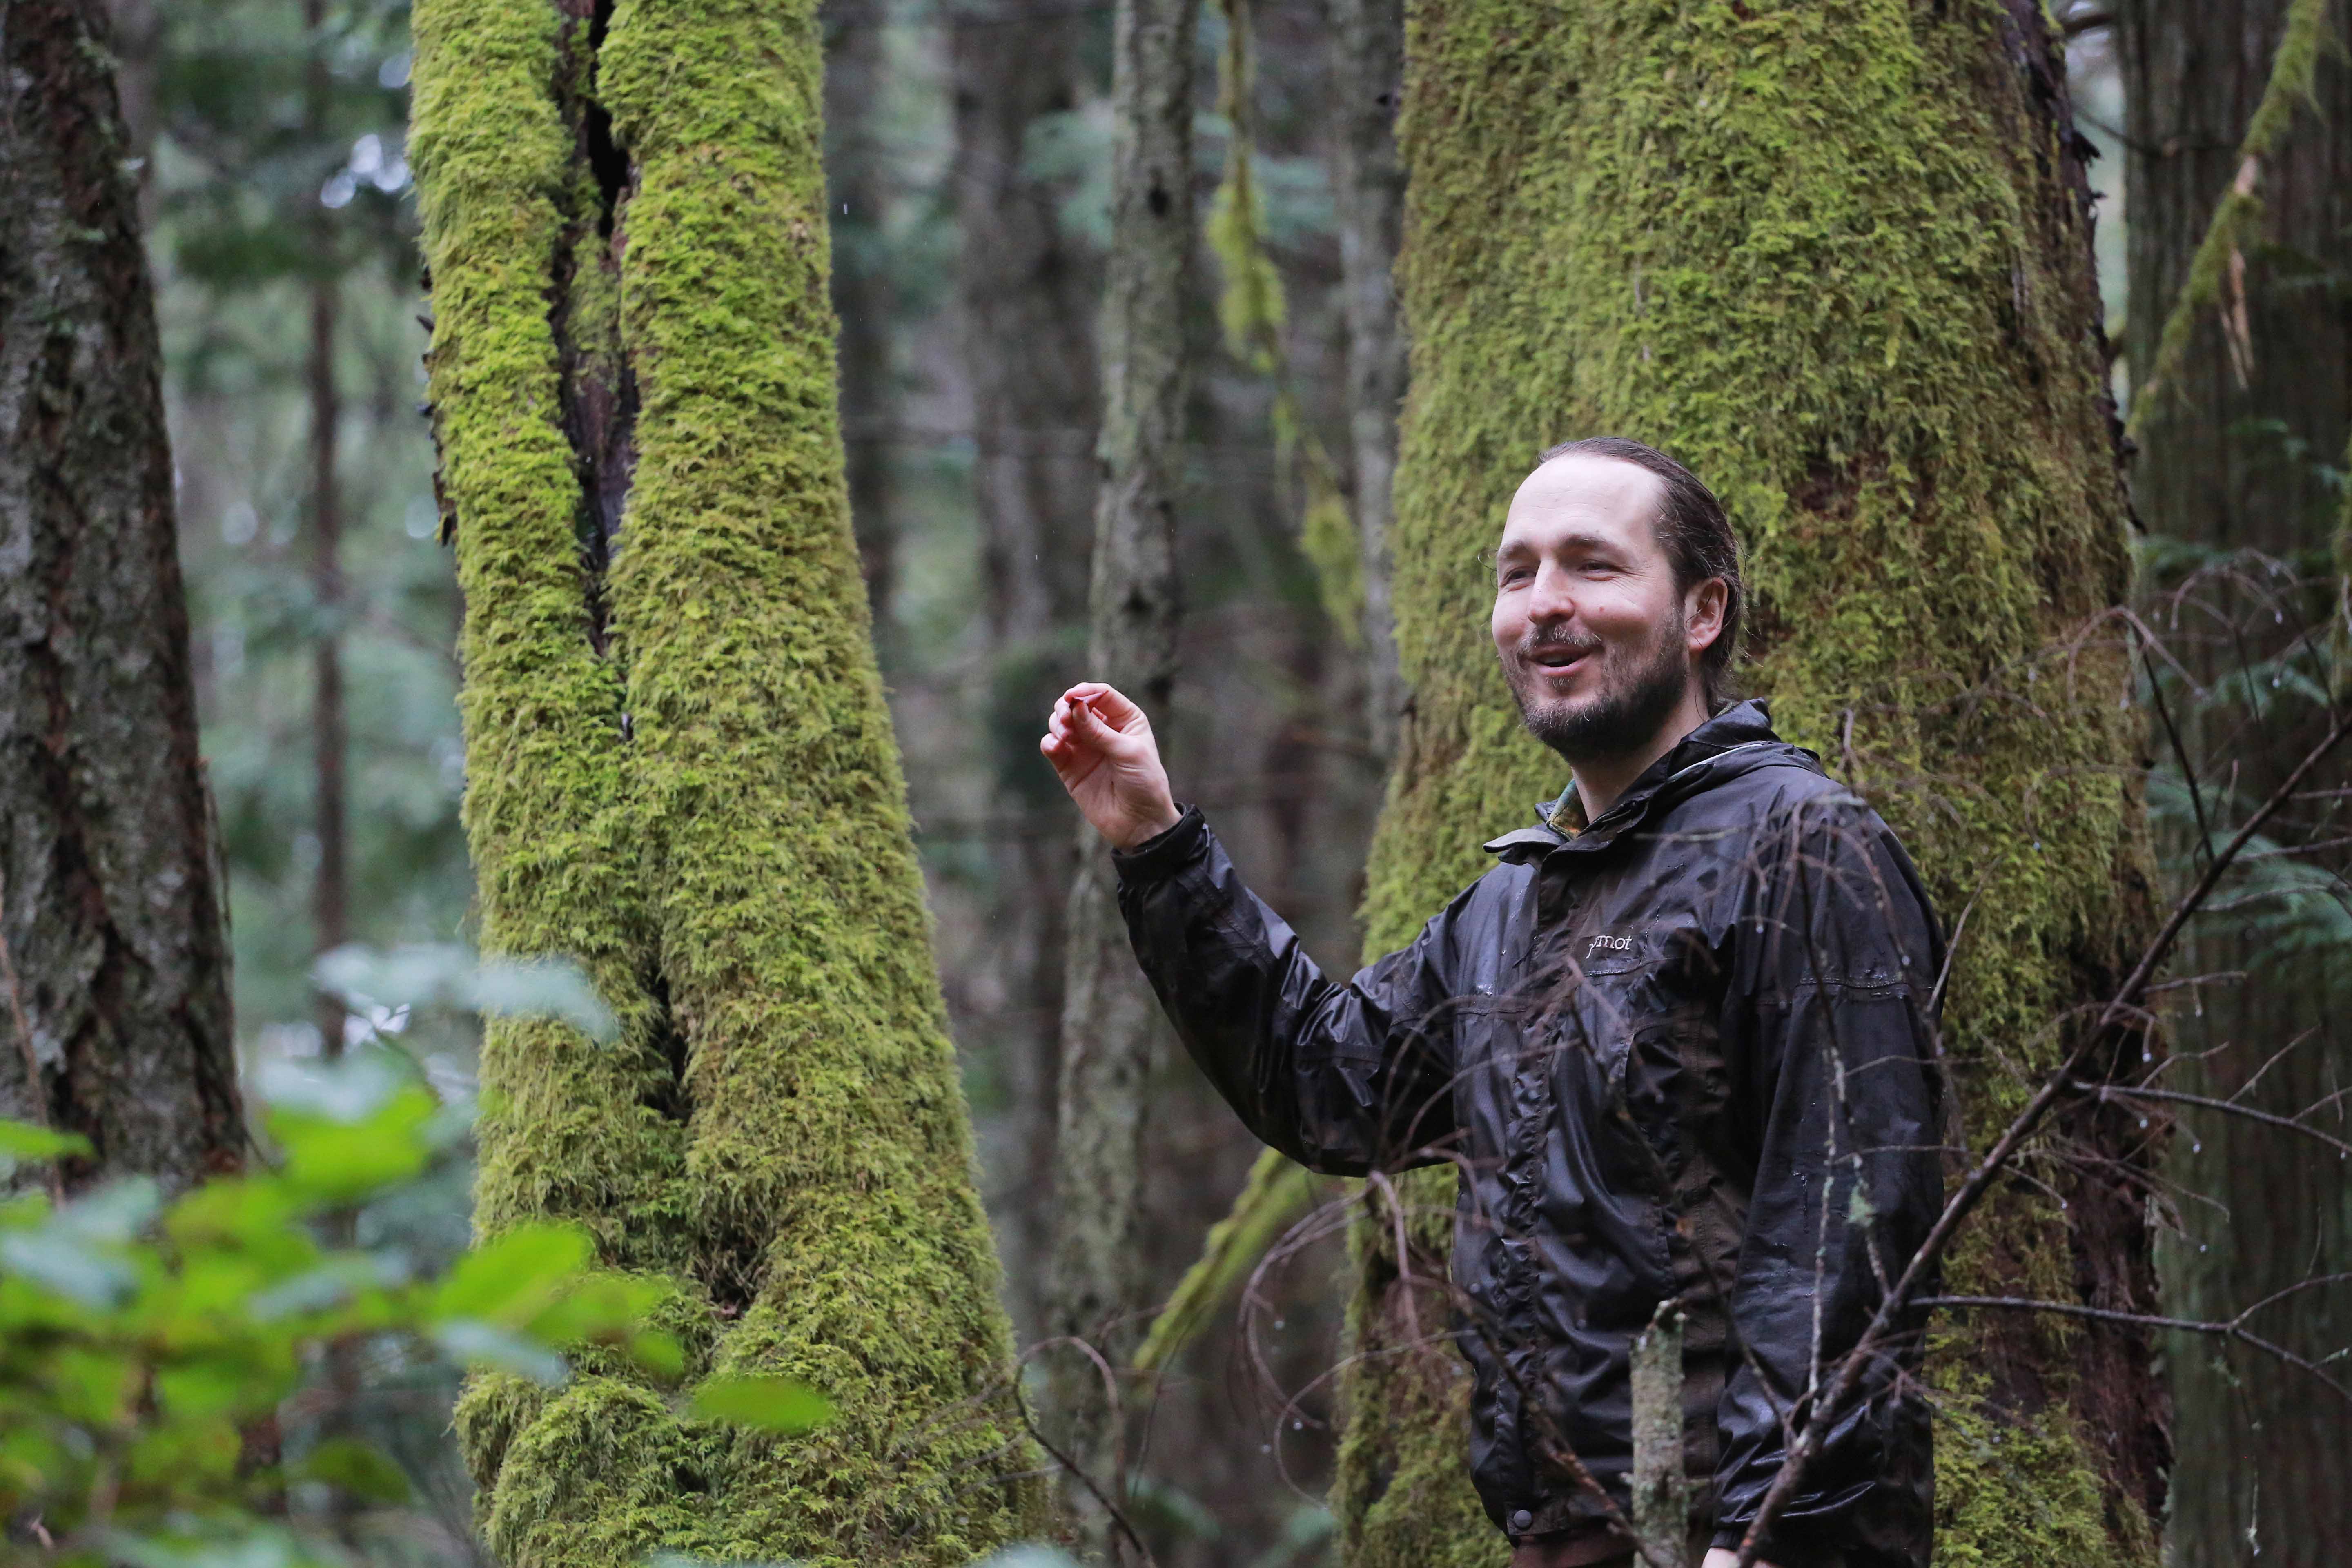 Dr. Lee Beavington teaching in a forest surrounded by moss-covered trees